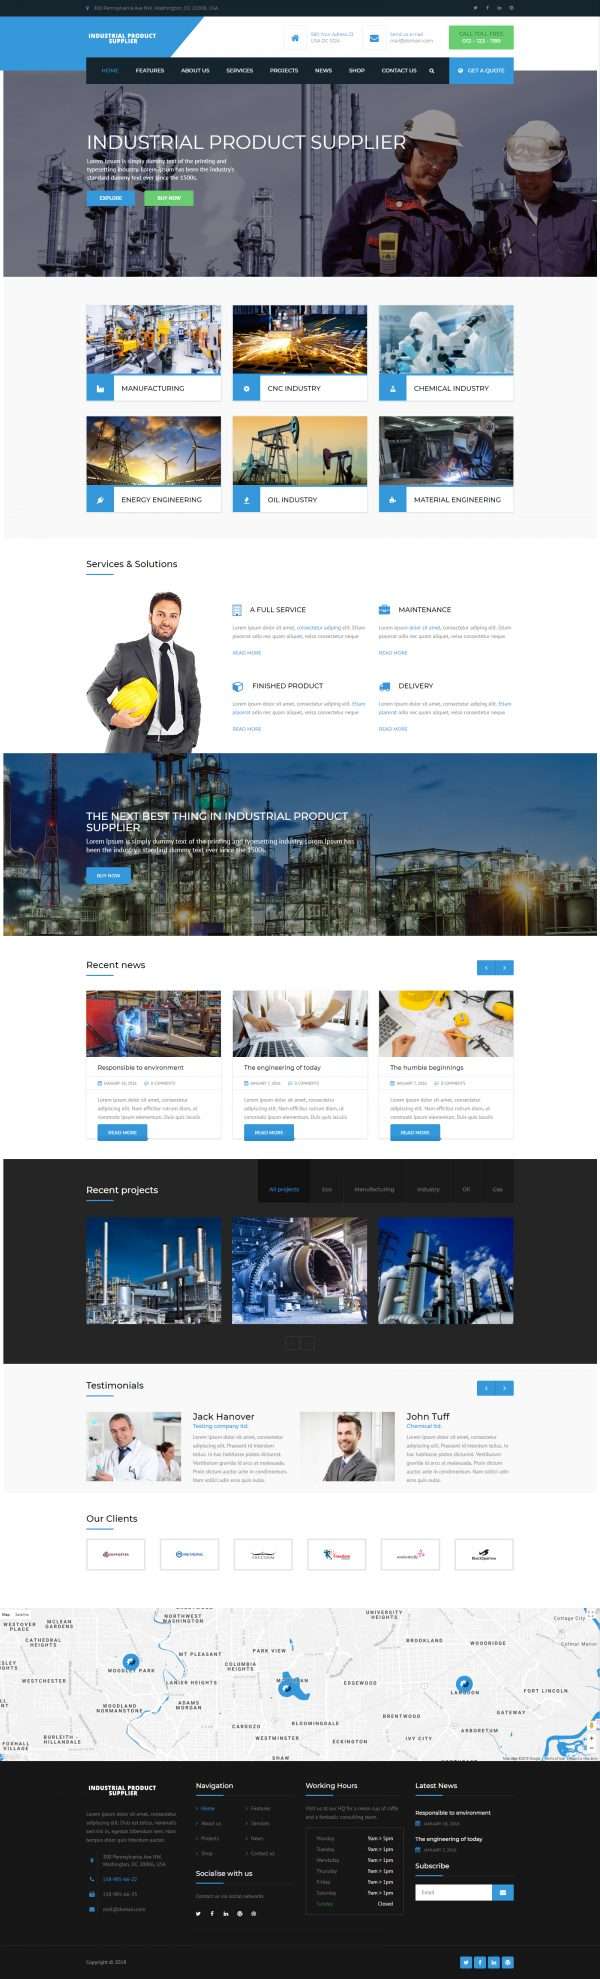 Industrial product supplier website template